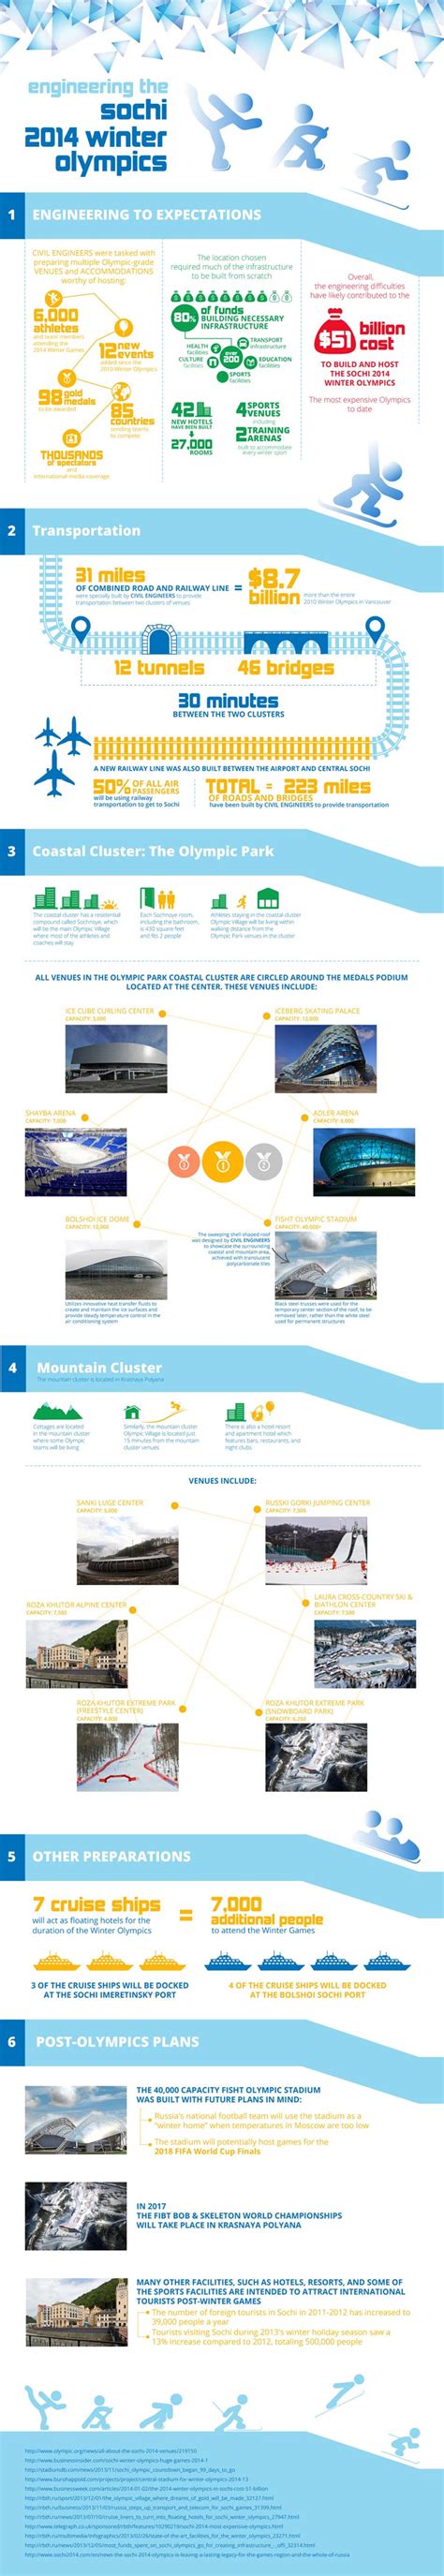 Infographic Engineering The Sochi 2014 Winter Olympic Games